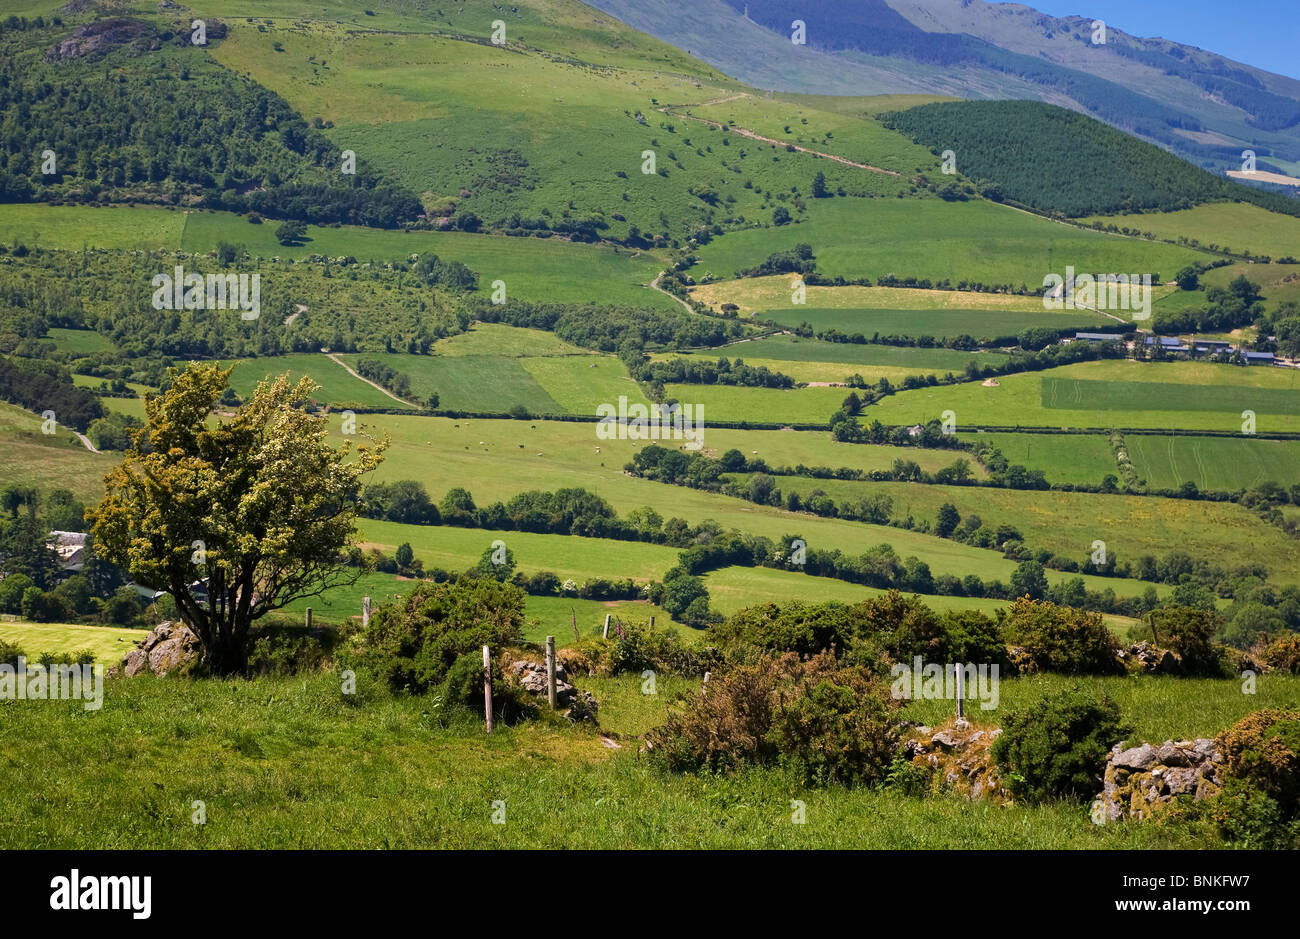 Waterford Ireland Farm High Resolution Stock Photography and Images - Alamy